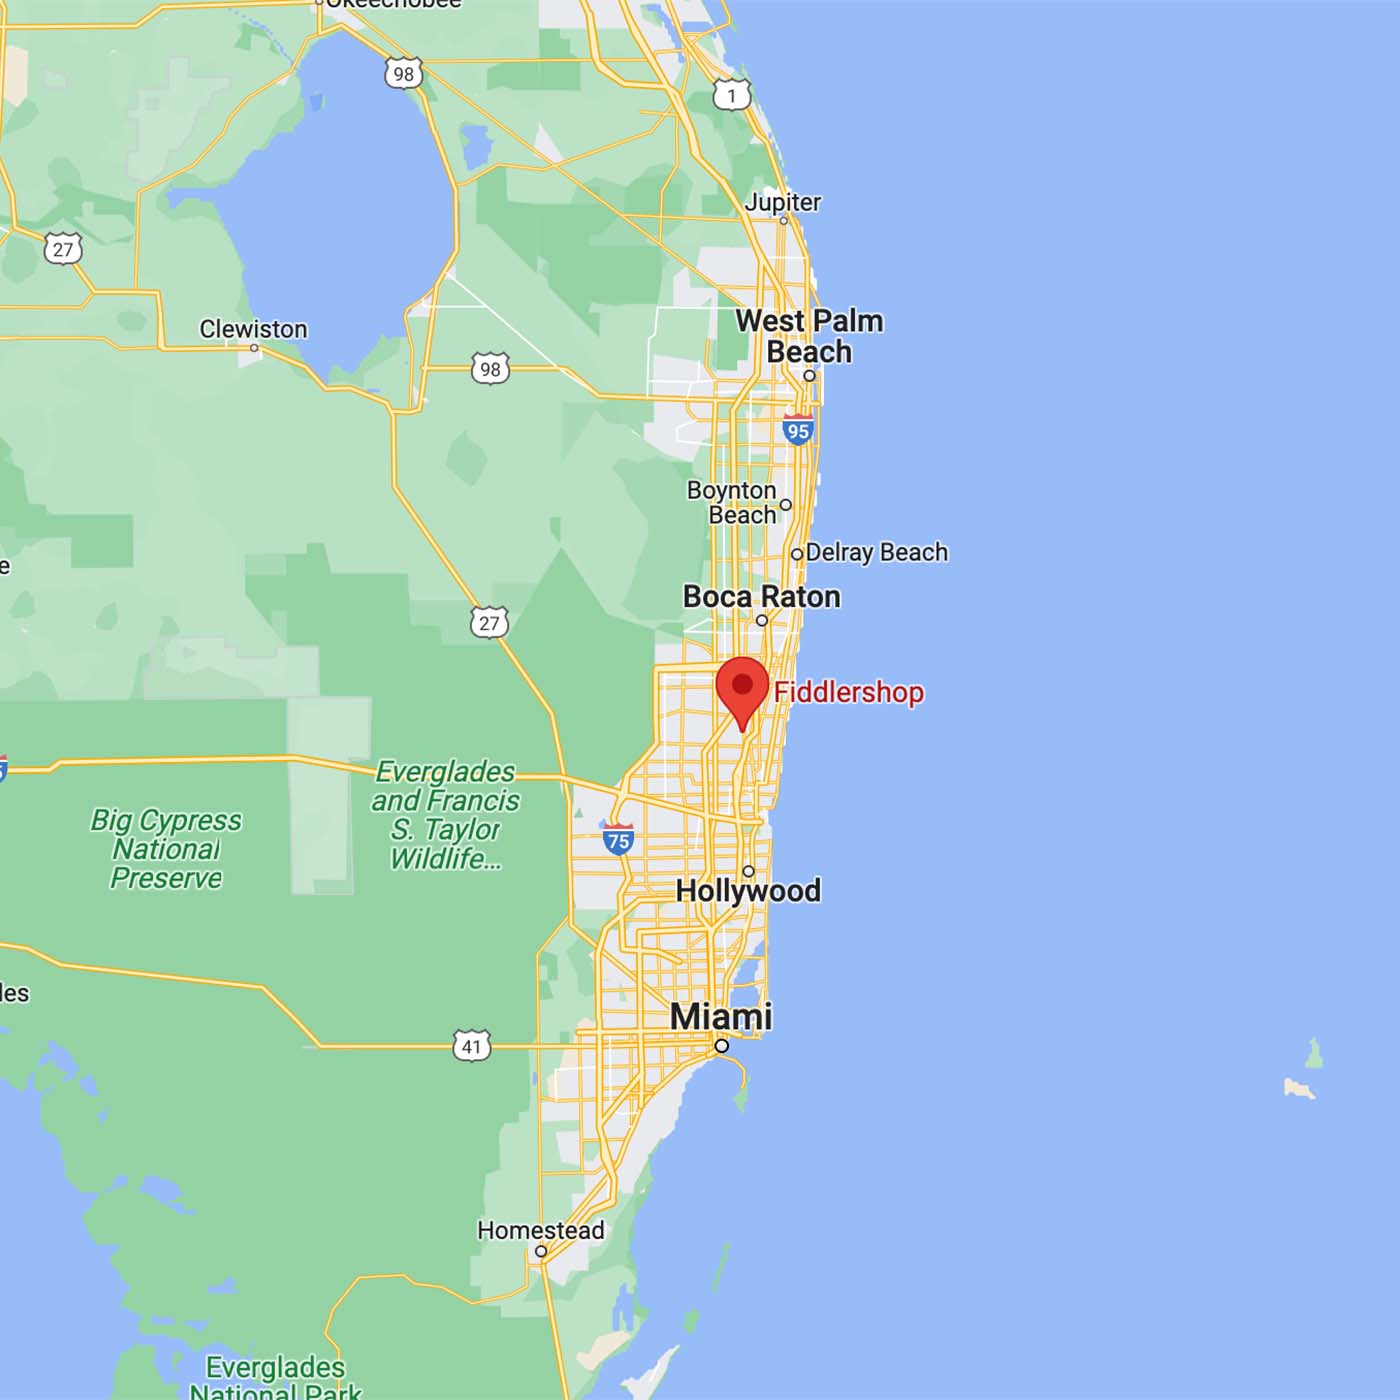 map of south florida highlighting the location of the violin shop Fiddlershop